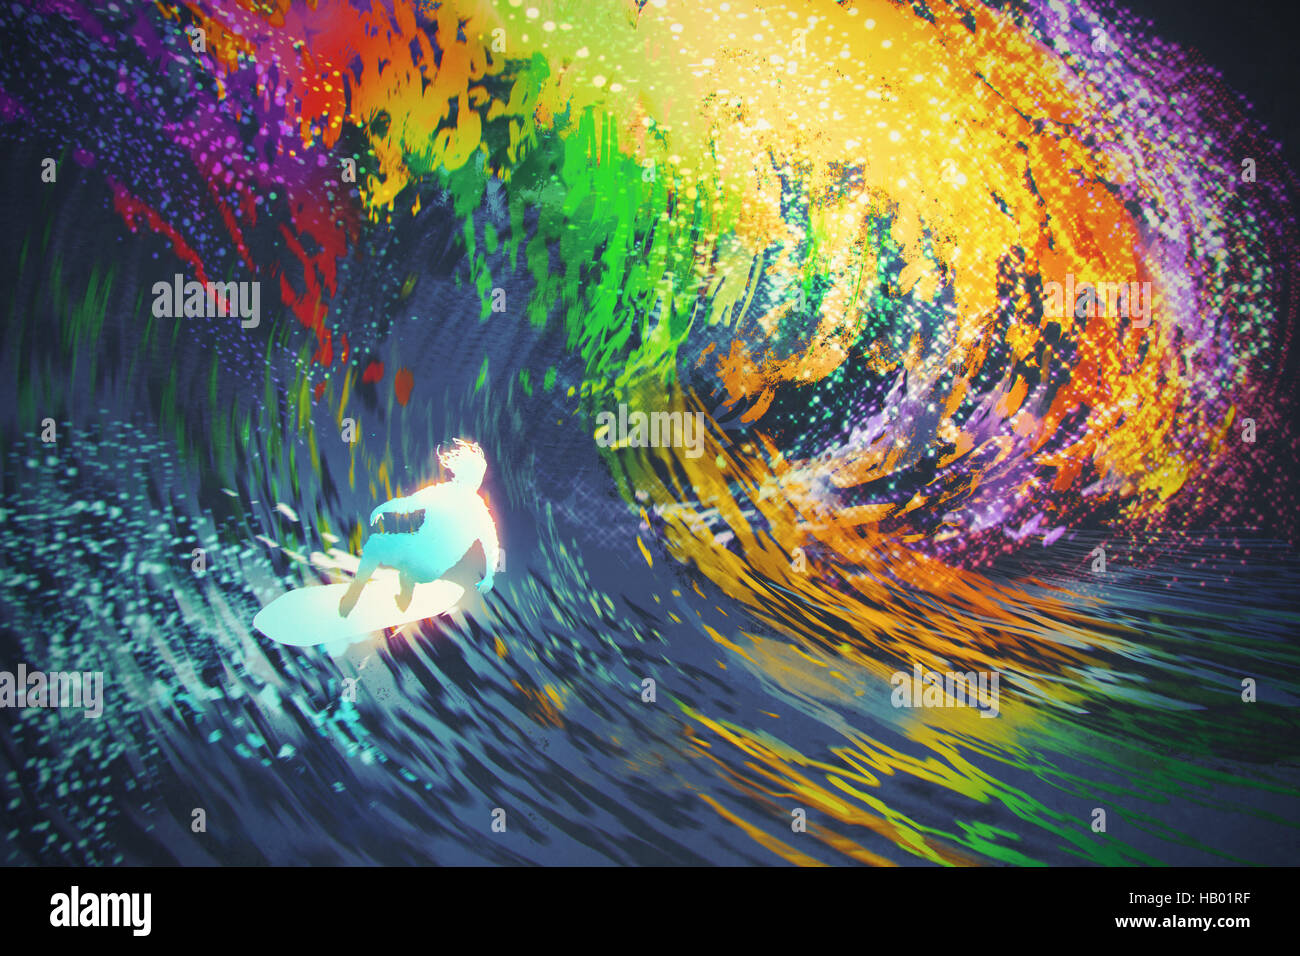 extreme surfer rides a colorful ocean wave,illustration painting Stock Photo